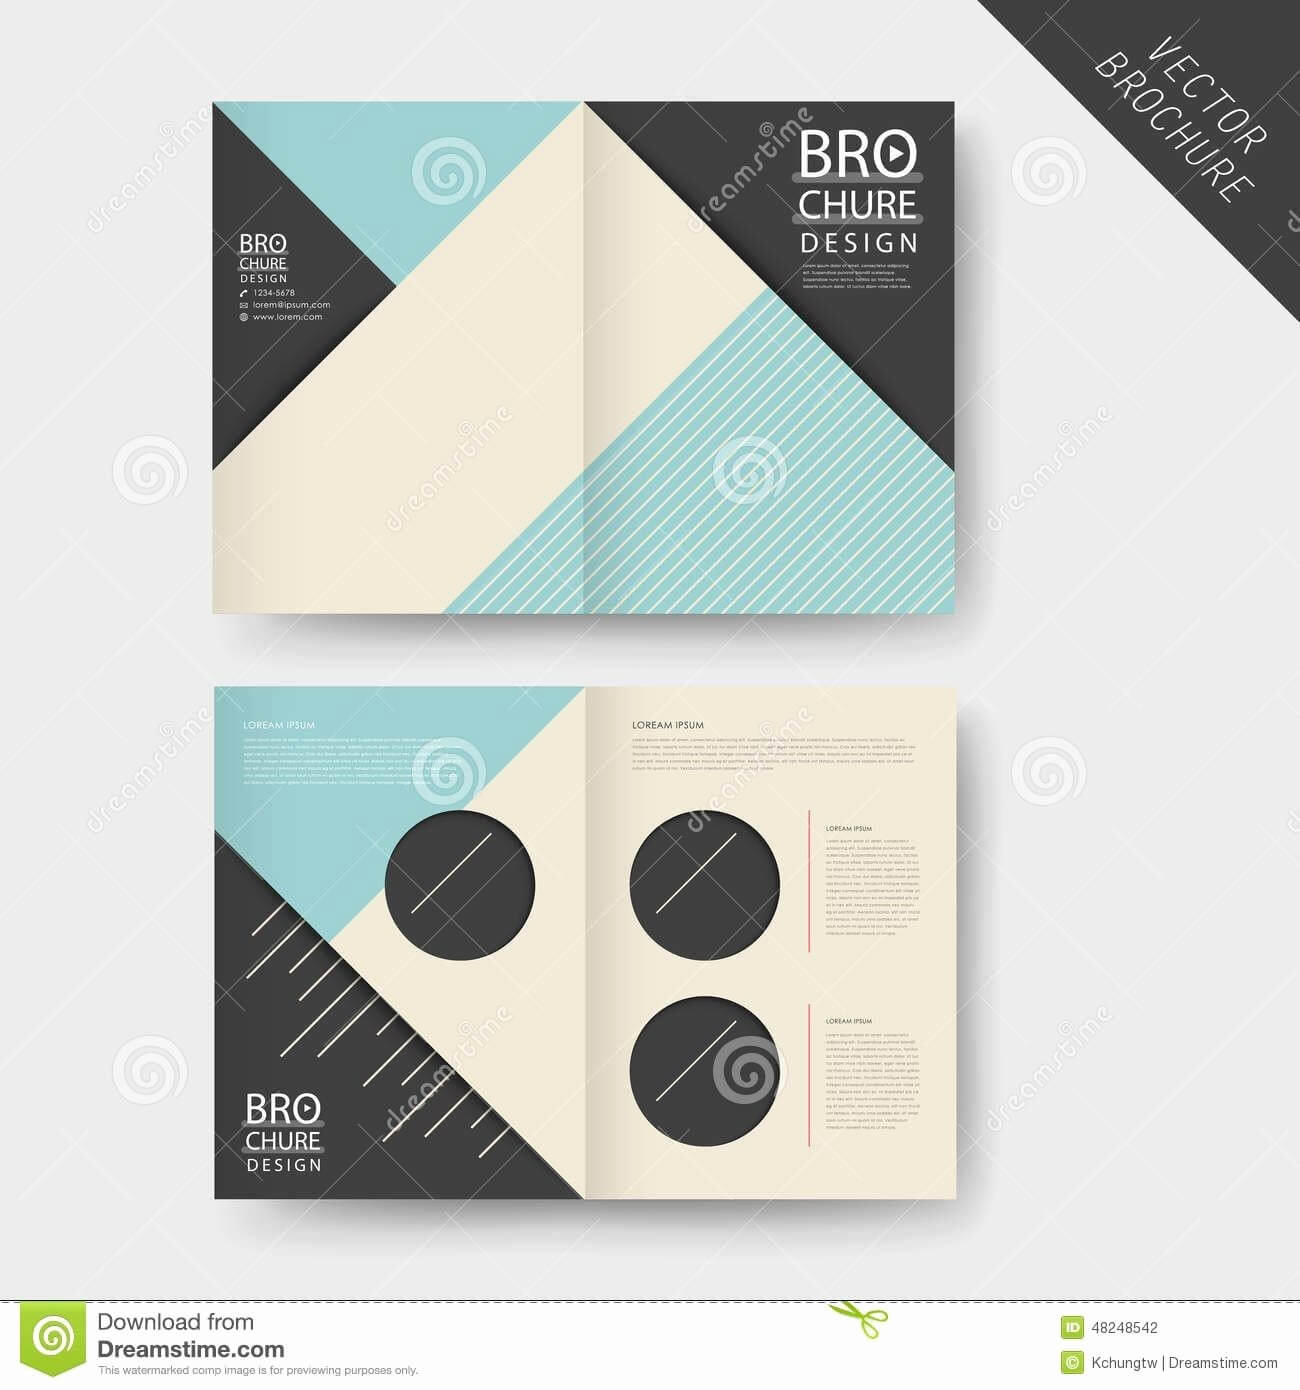 022 Free Half Page Flyer Template Best Of Brochure Reeviewer With Regard To Half Page Brochure Template